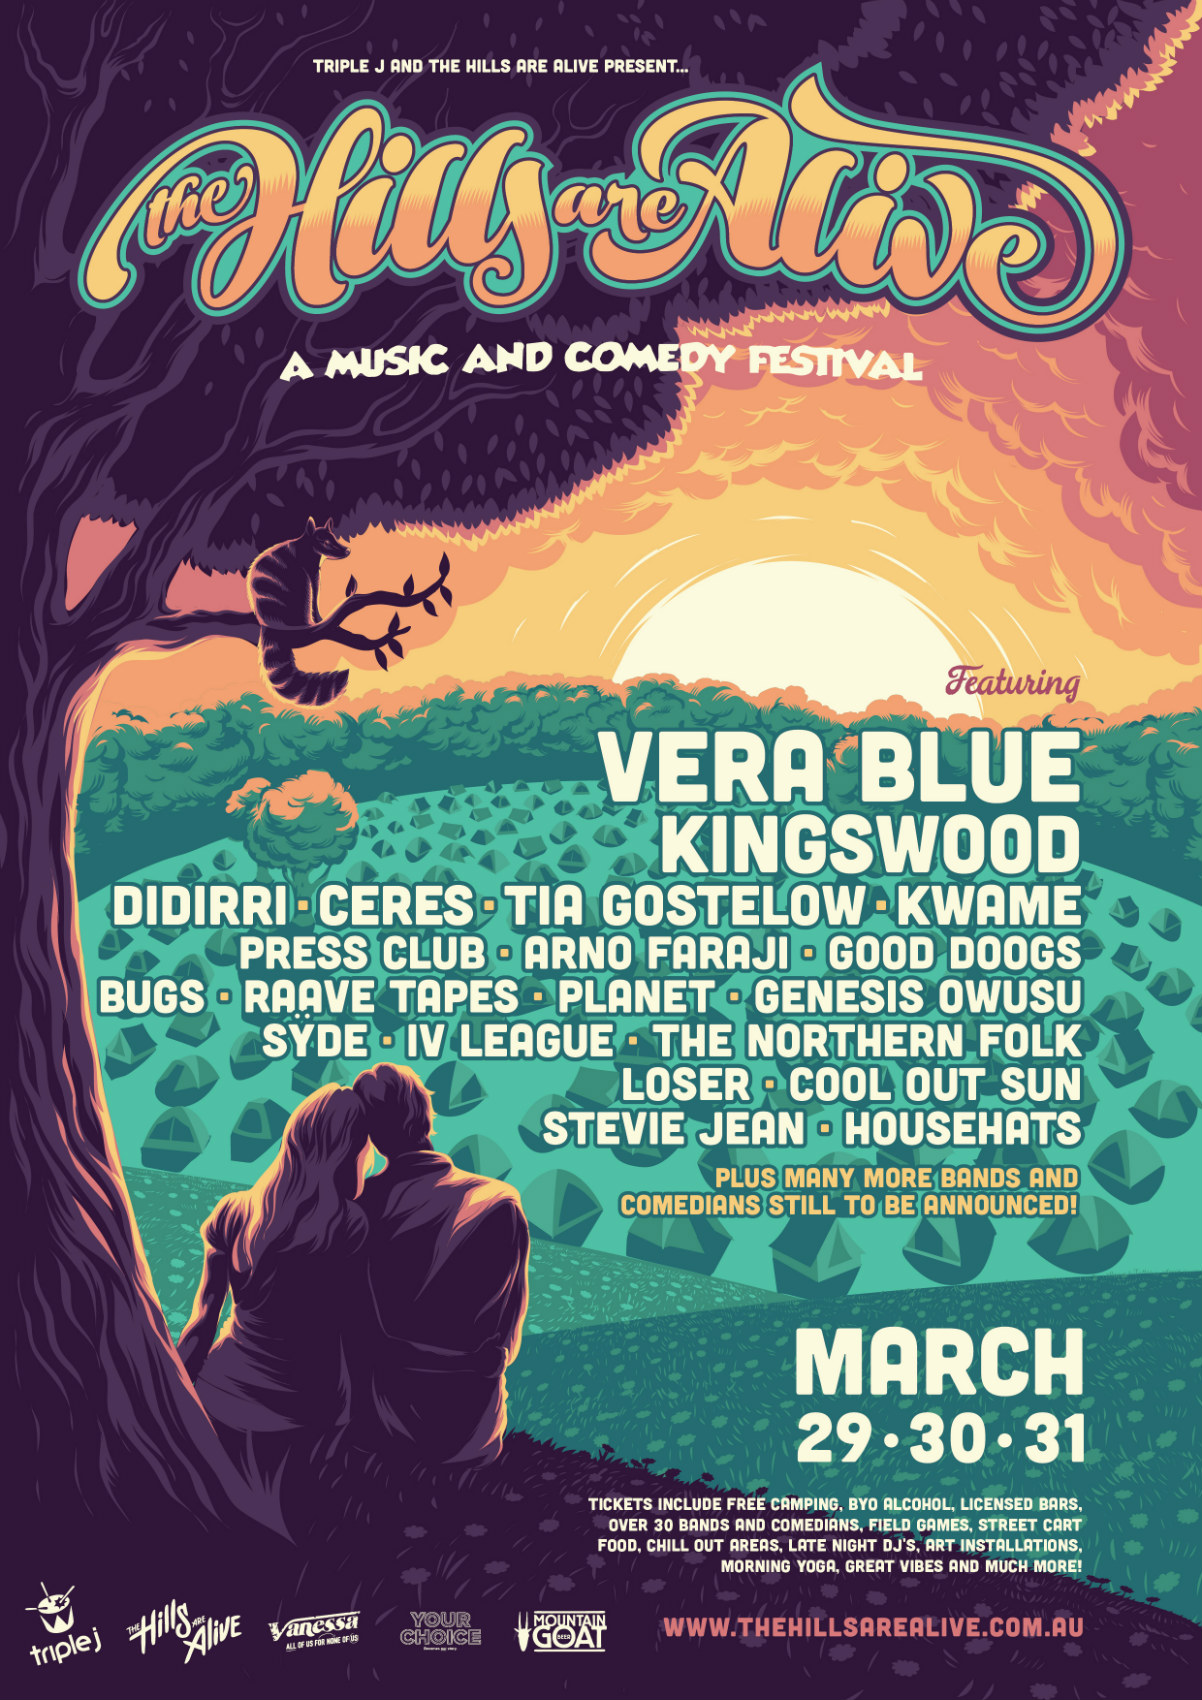 The Hills Are Alive Festival Drops Full Lineup Ft. Vera Blue, Kingswood